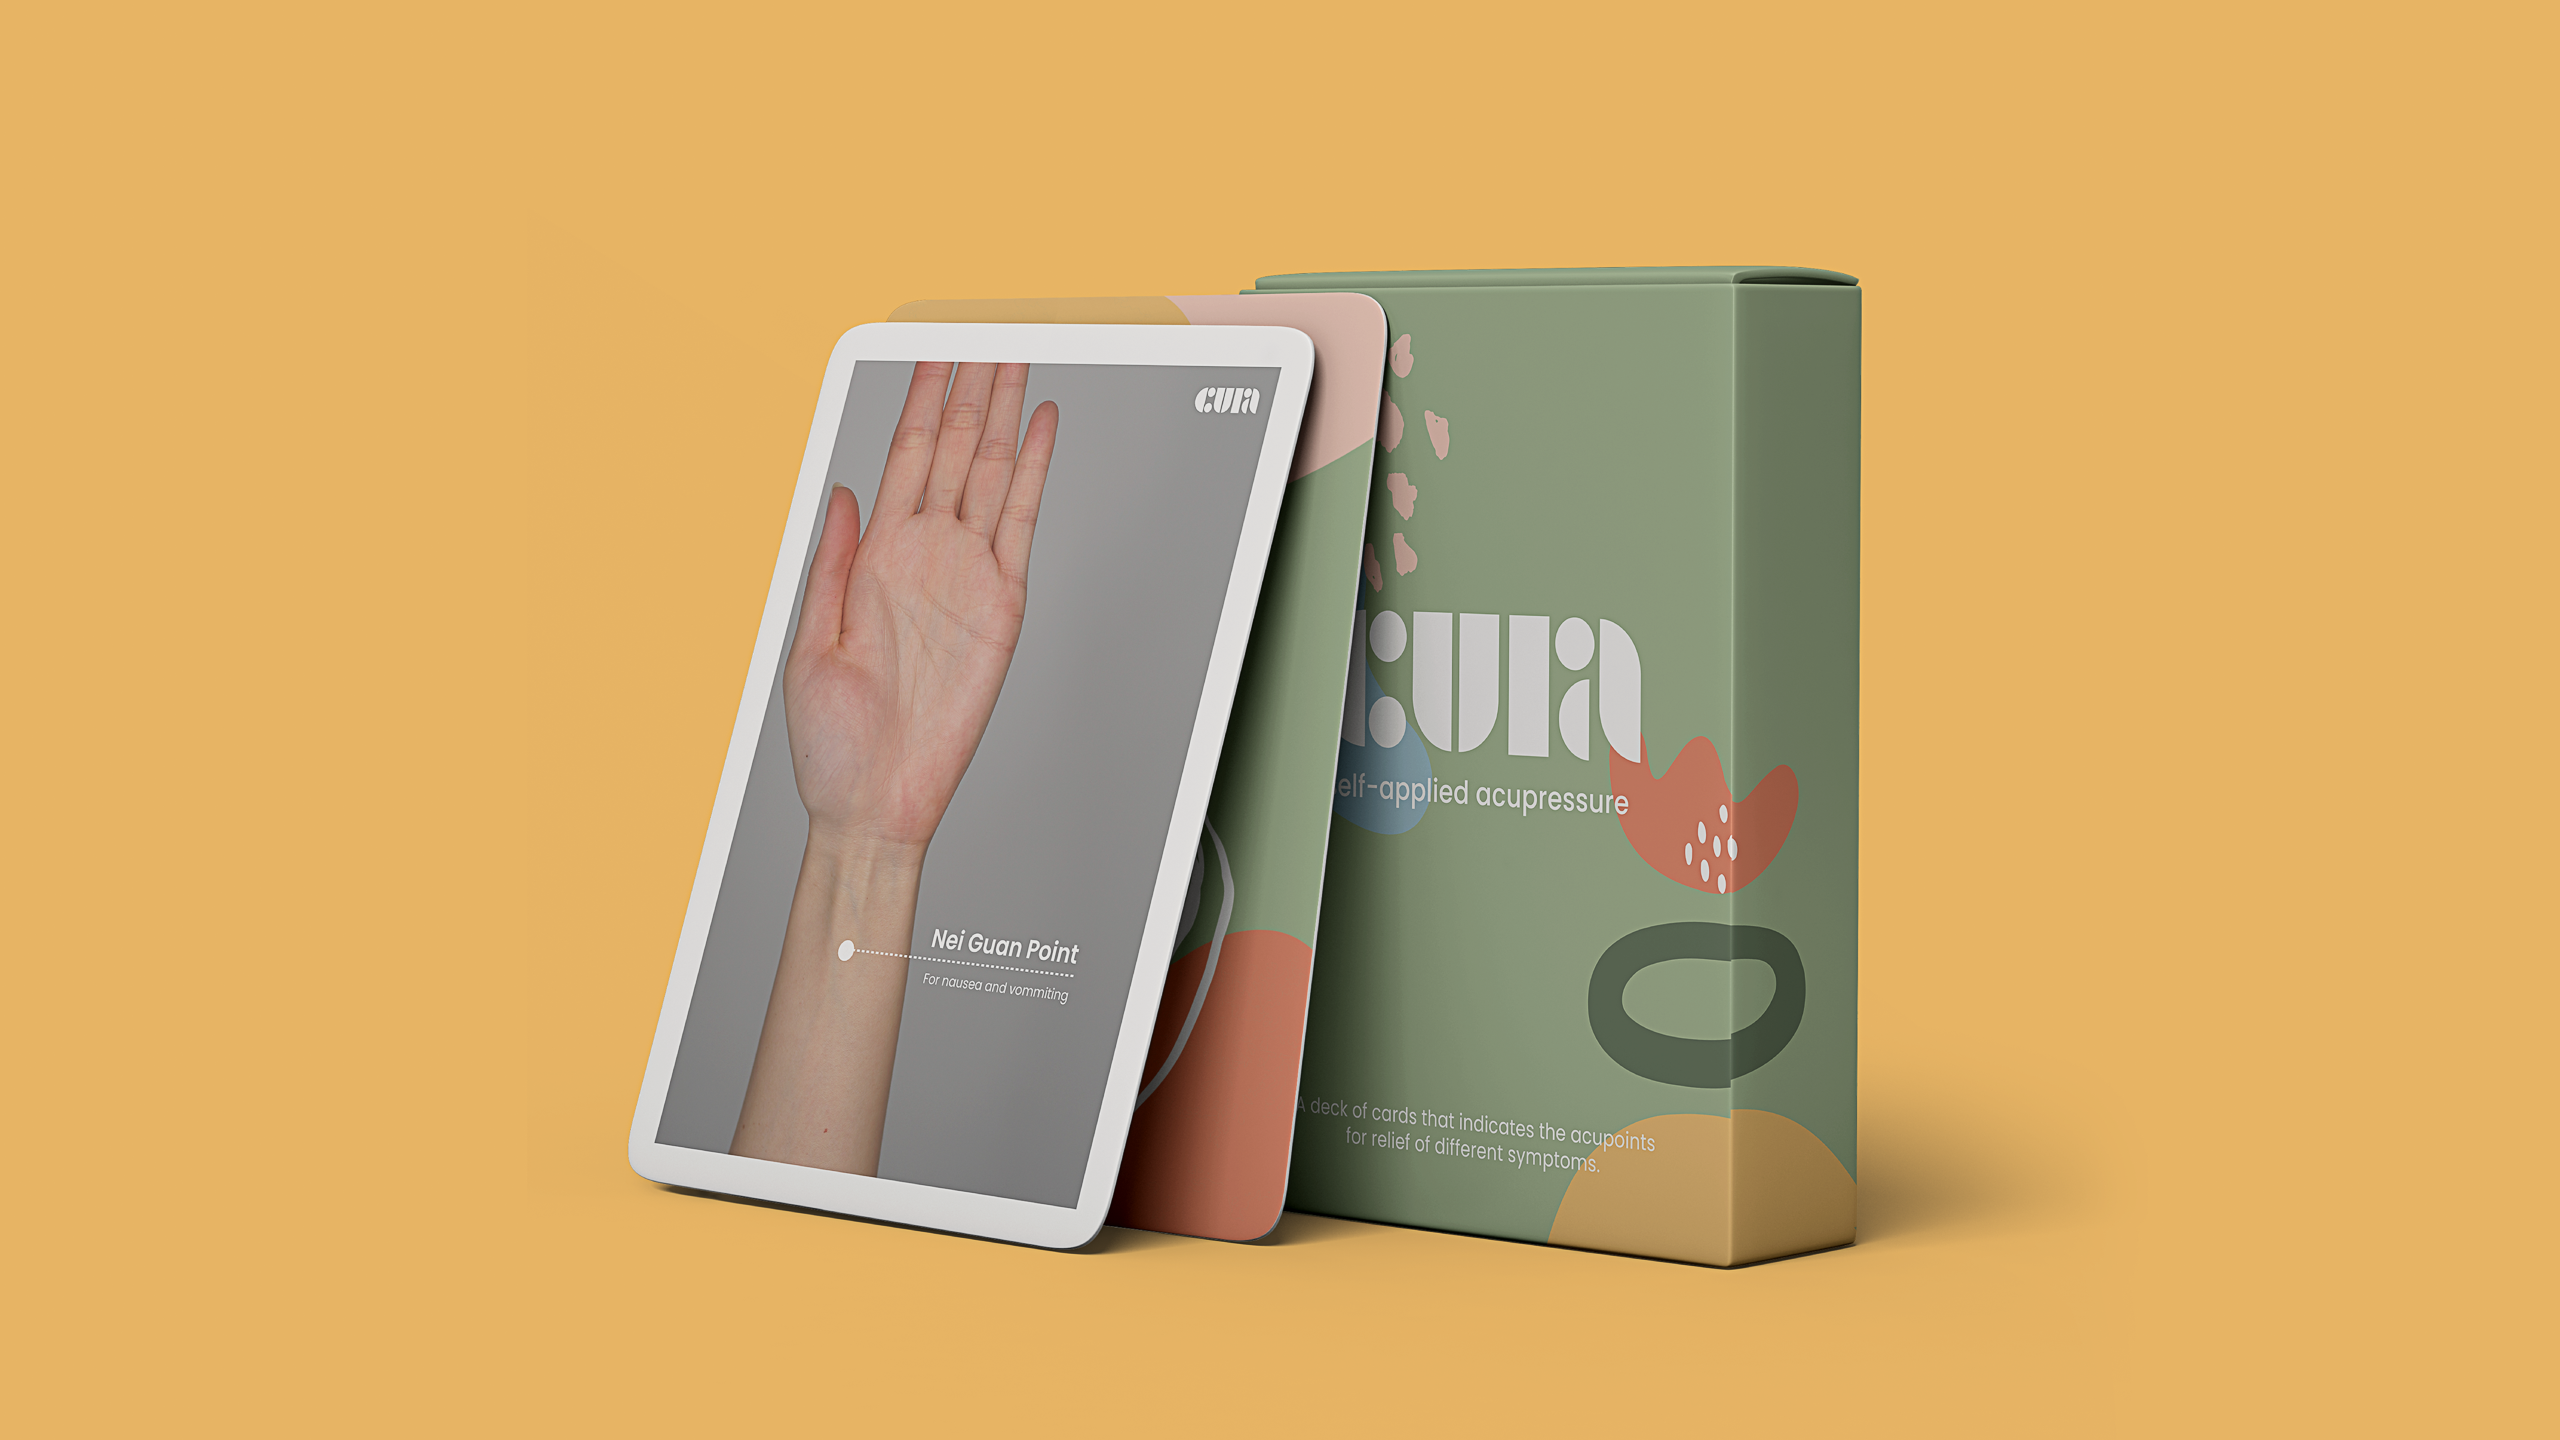 Cura box with branding items